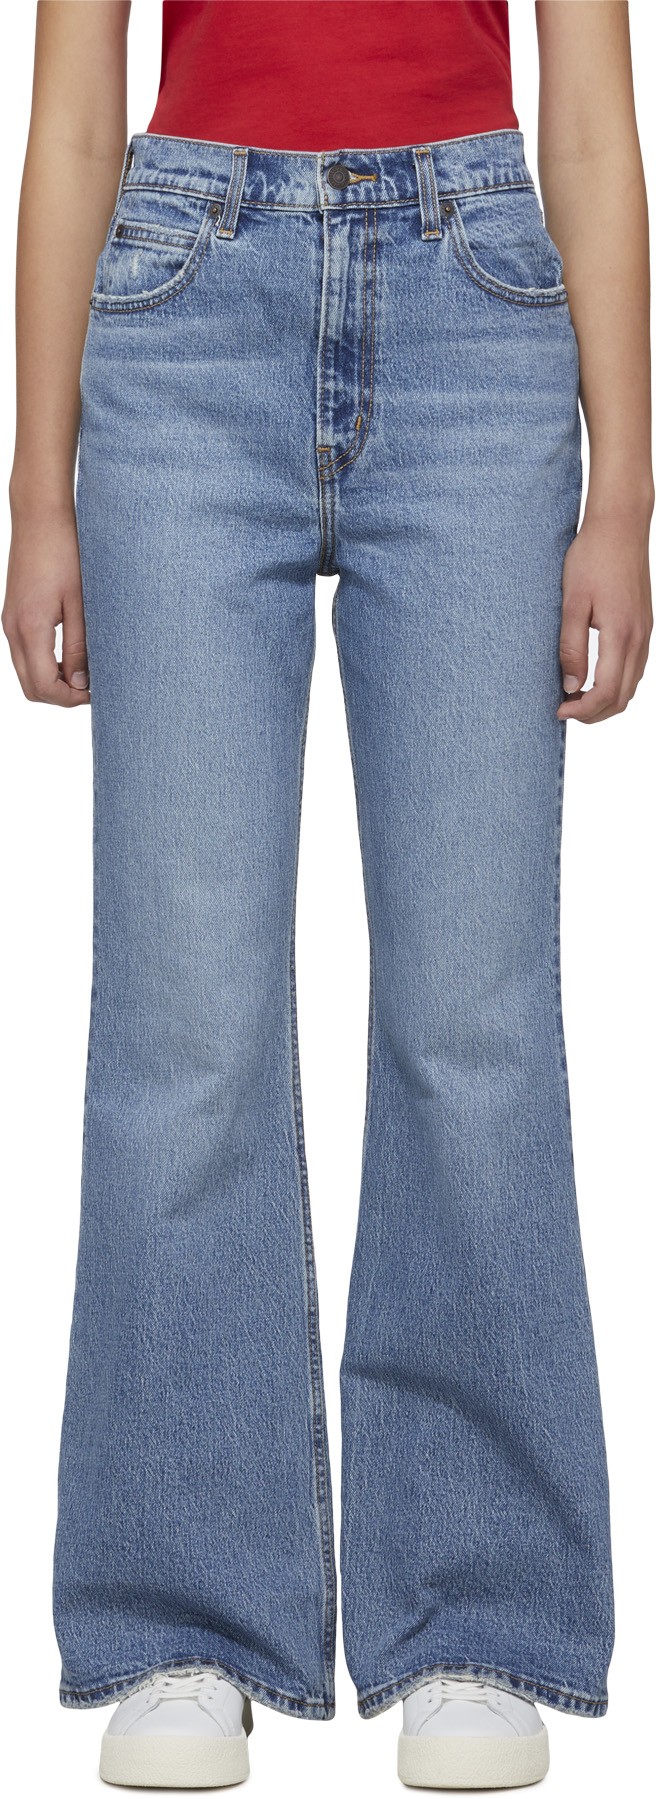 Levis: 70's High Rise Flare Jeans | influenceu